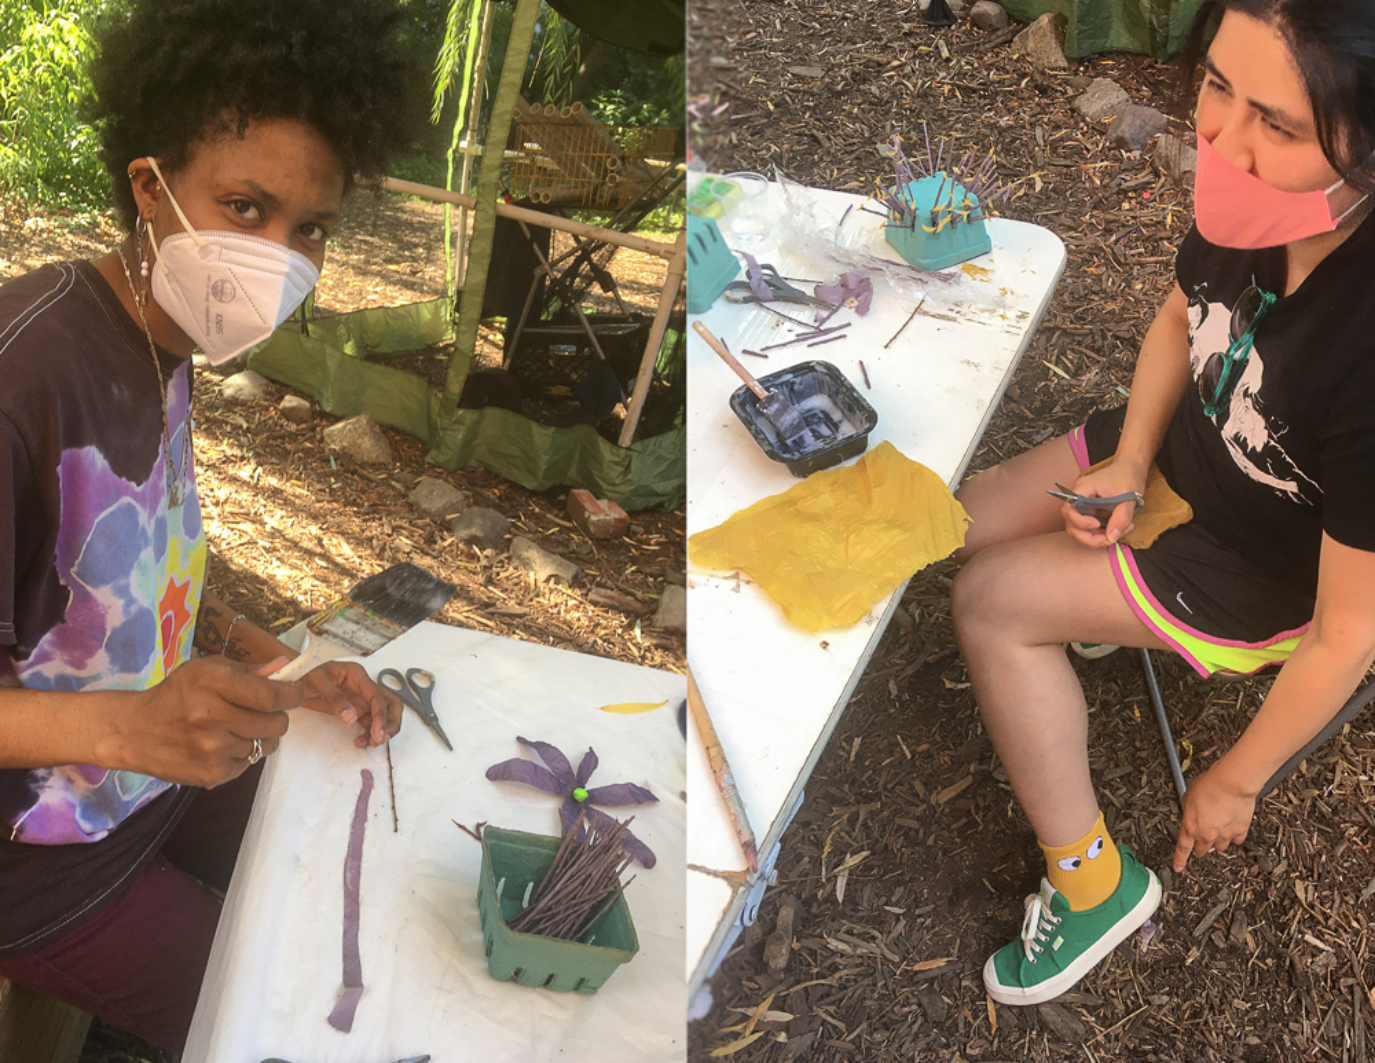 This is a split image. Left: a person poses for the image as they make purple flowers at a white table. There are trees in the background. Right: one person sits at a white table filled with materials. She has a pink mask on and yellow socks and green shoes.